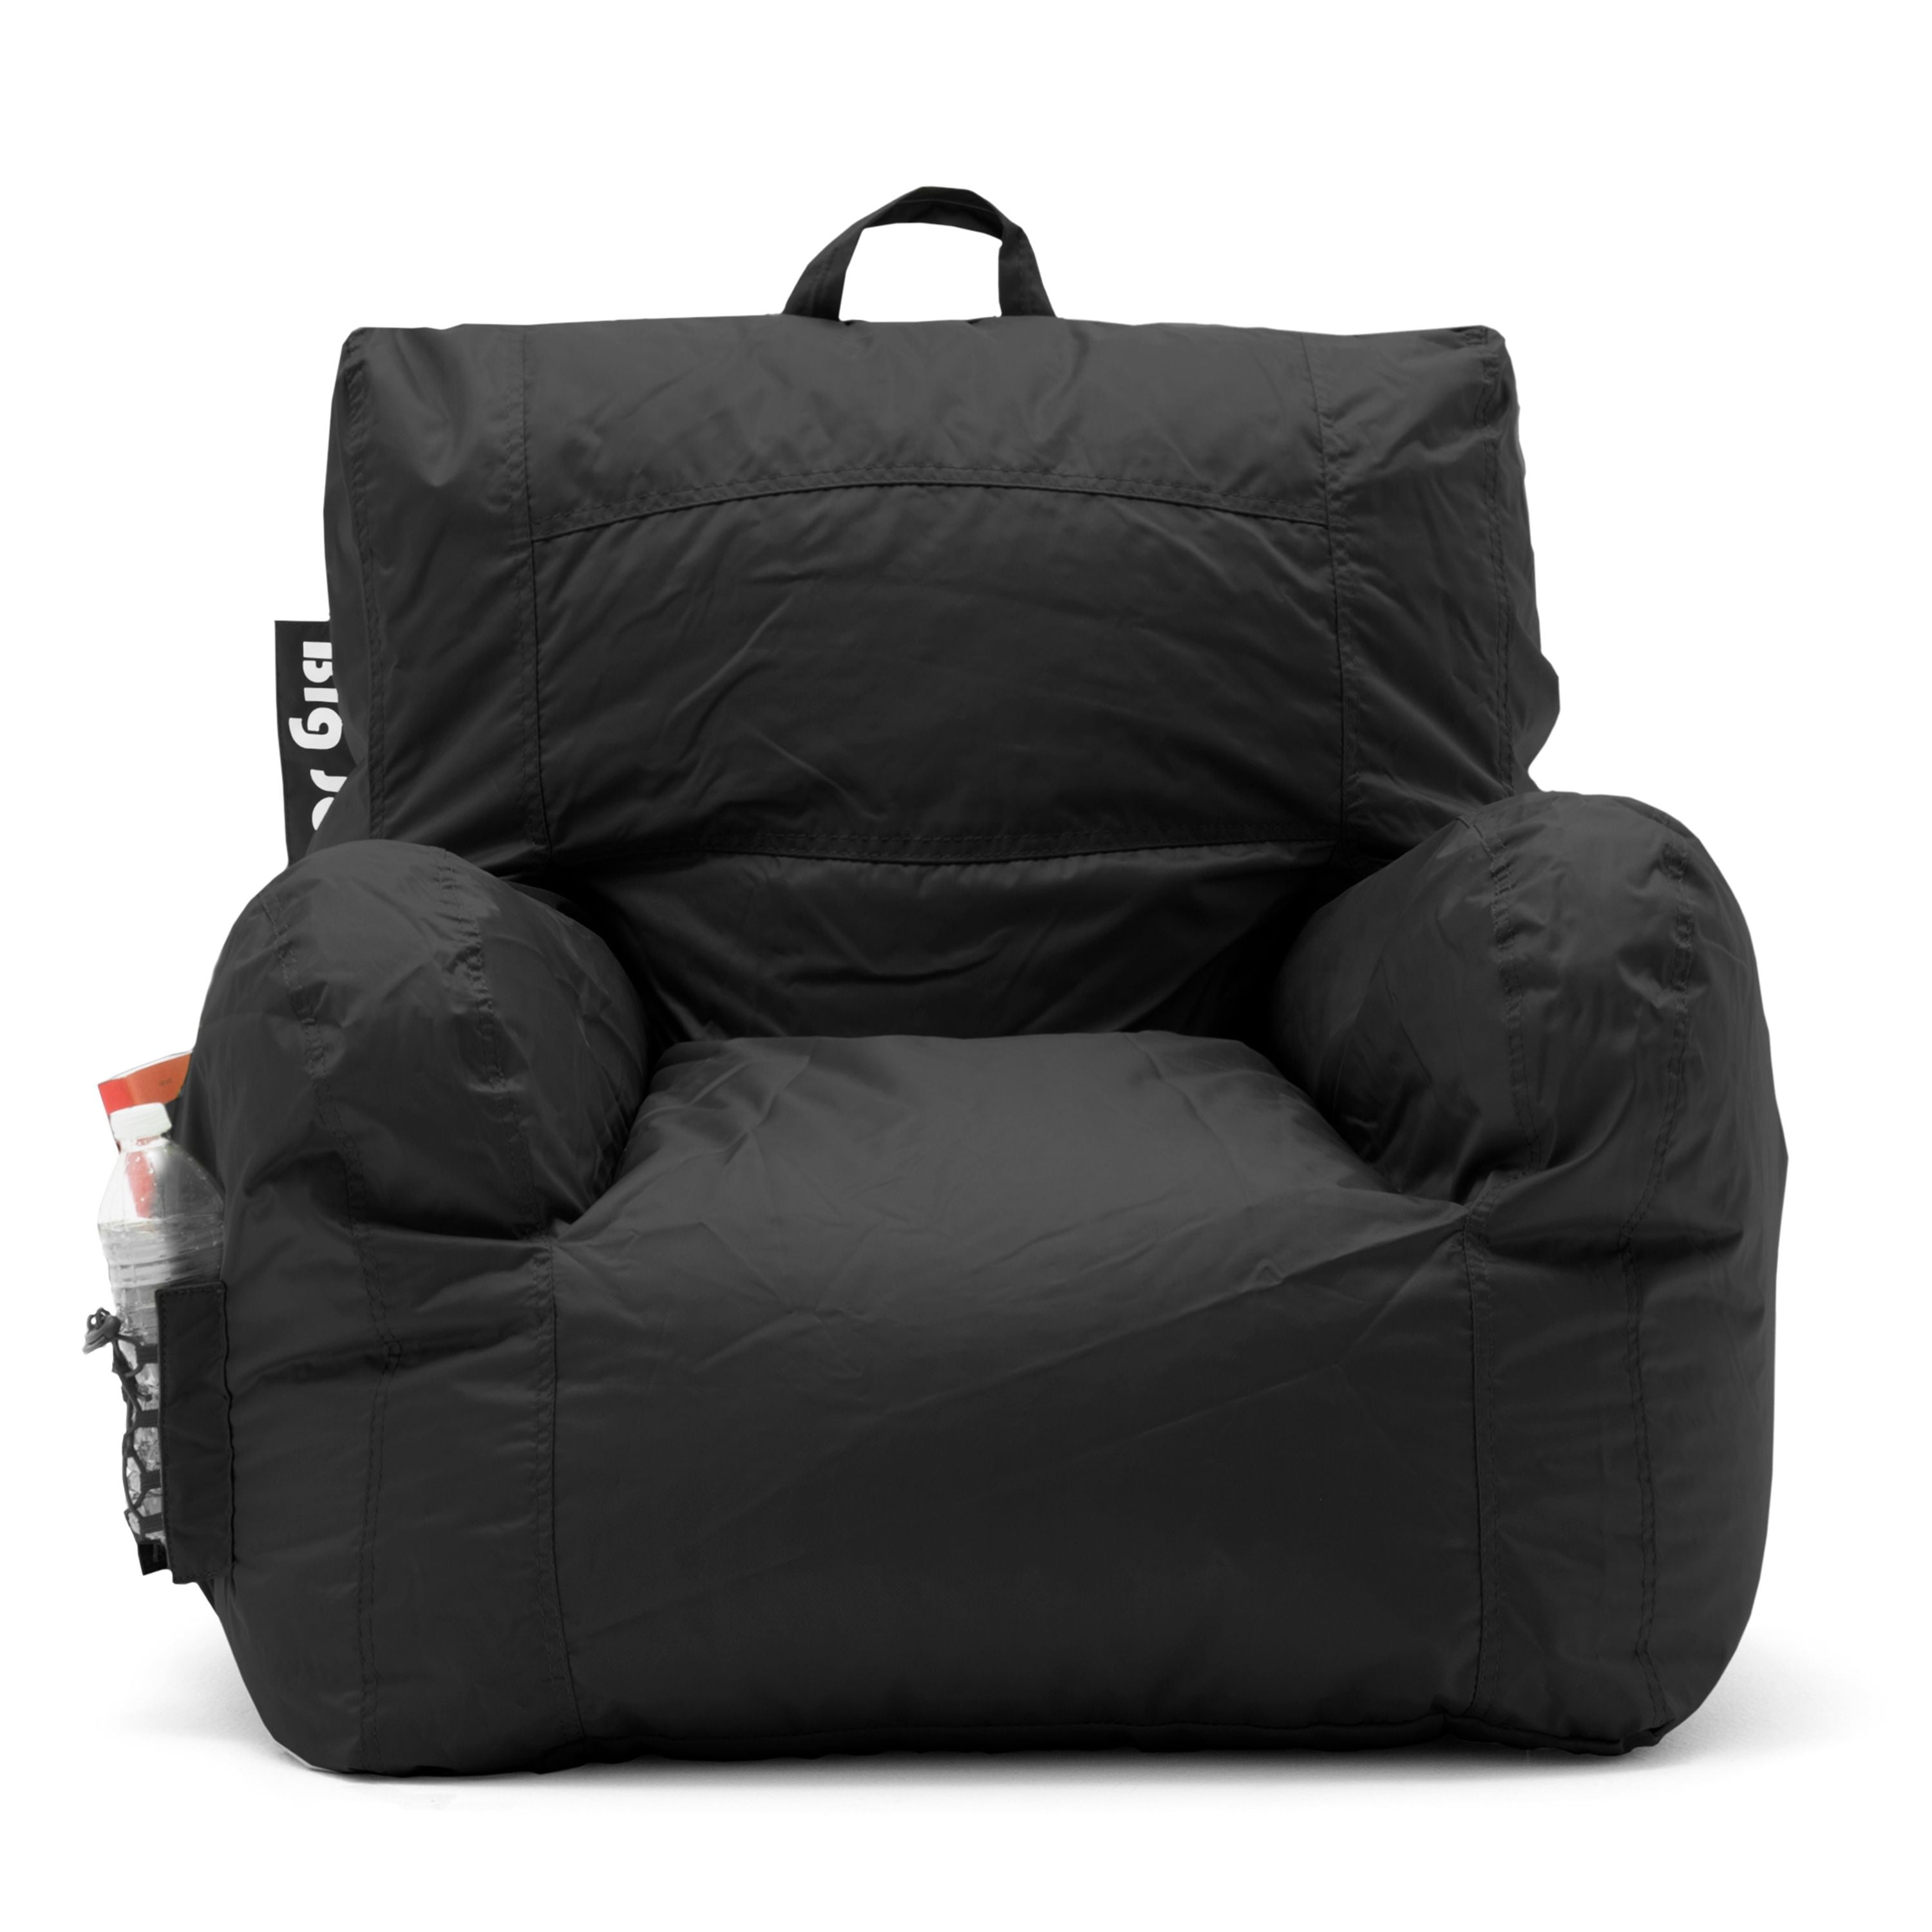 AJD Home Black Bean Bag Lounger Adult Size, Large Bean Bag Chair with Filler  Included, Big Bean Bag Chairs for Adults - On Sale - Bed Bath & Beyond -  32351401